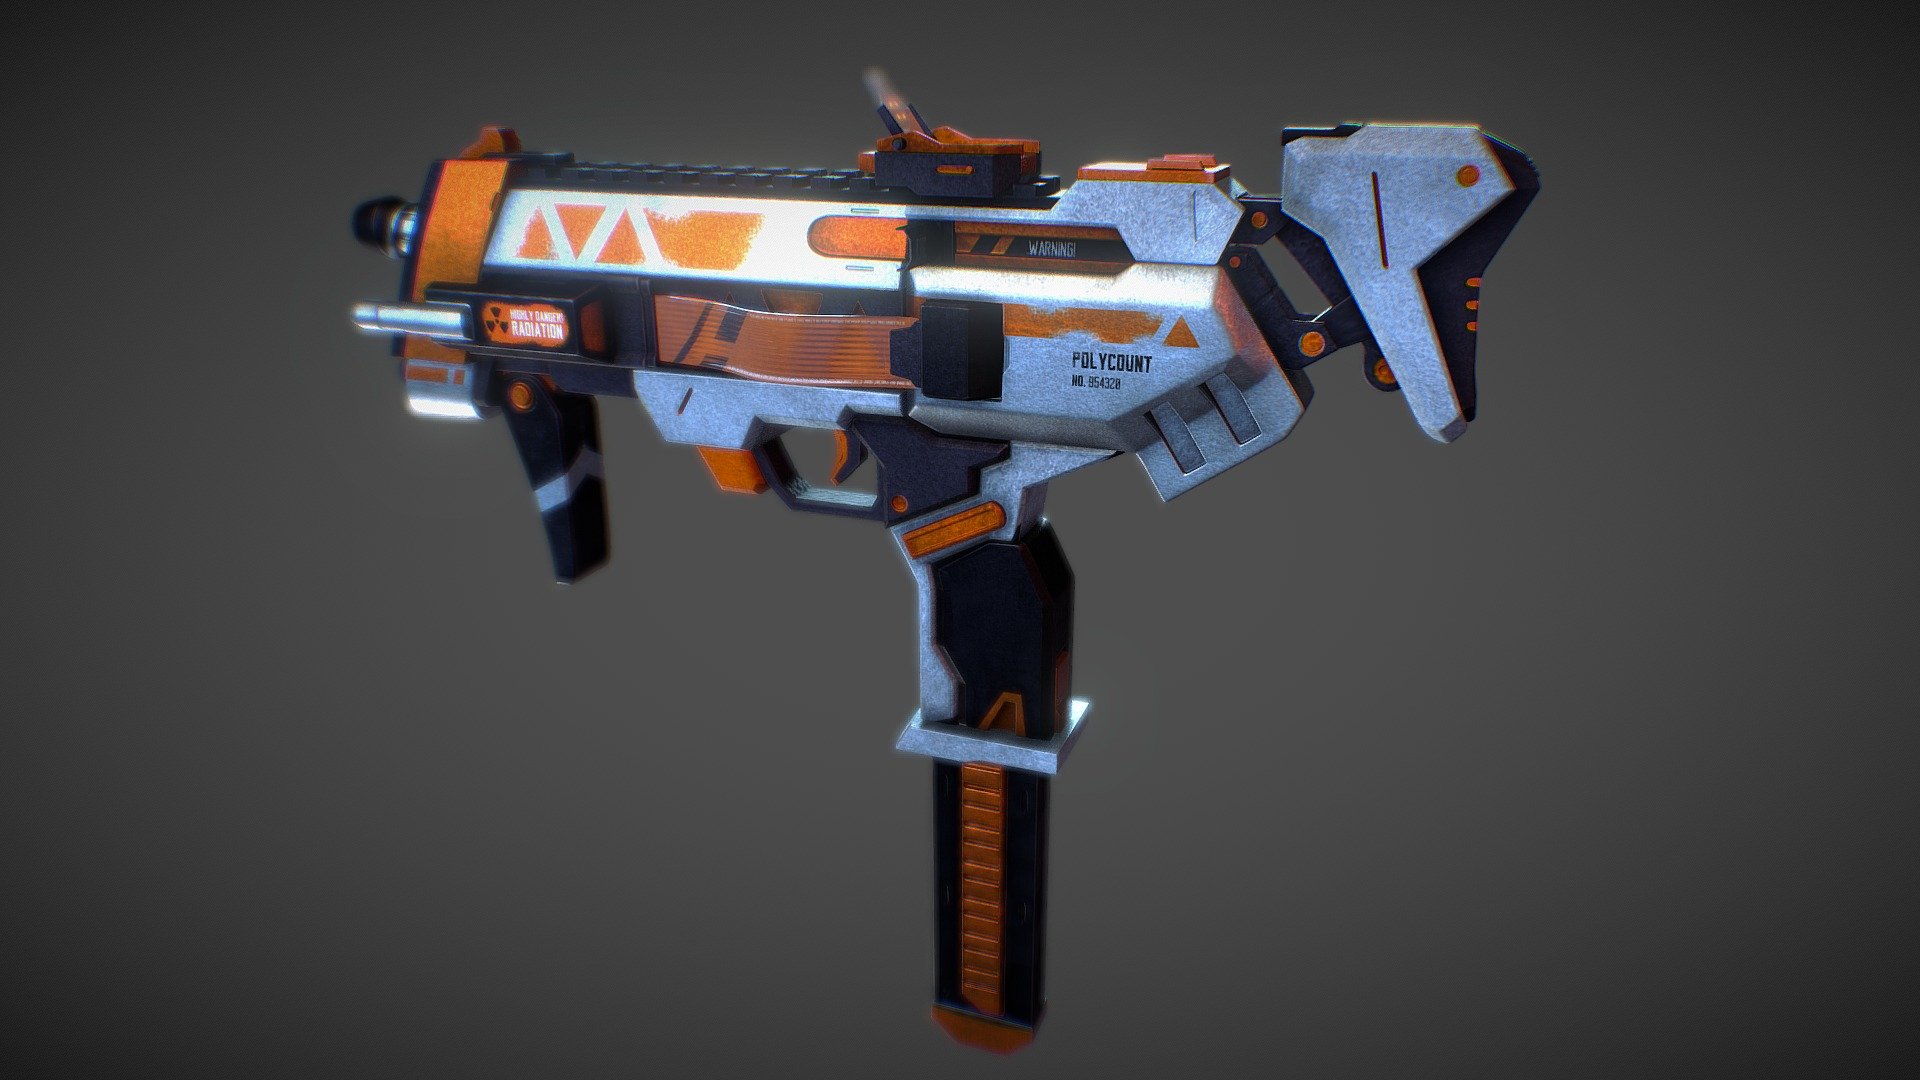 Sombra Pistols - Asiimov Skin CSGO

Hi! There, I want to show you my latest hard surface modeling where is I made a weapon from the cool character on Overwatch (Sombra). I try to challenge myself to create different textures from the original, so I decide to use Asiimov skin from CSGO as my reference, i took almost two weeks to finish model, texture, lighting, and rendering btw here is the result :)
btw the texture on the right side flipped, coz I just mirror the UV and overlapped xD I'm too lazy to create another uv map

Software used : Autodesk Maya 2018, Blender, Photoshop - Overwatch Sombra Pistols - Asiimov Skin - 3D model by BANTENGWT (@ditowidiantomo1) 3d model